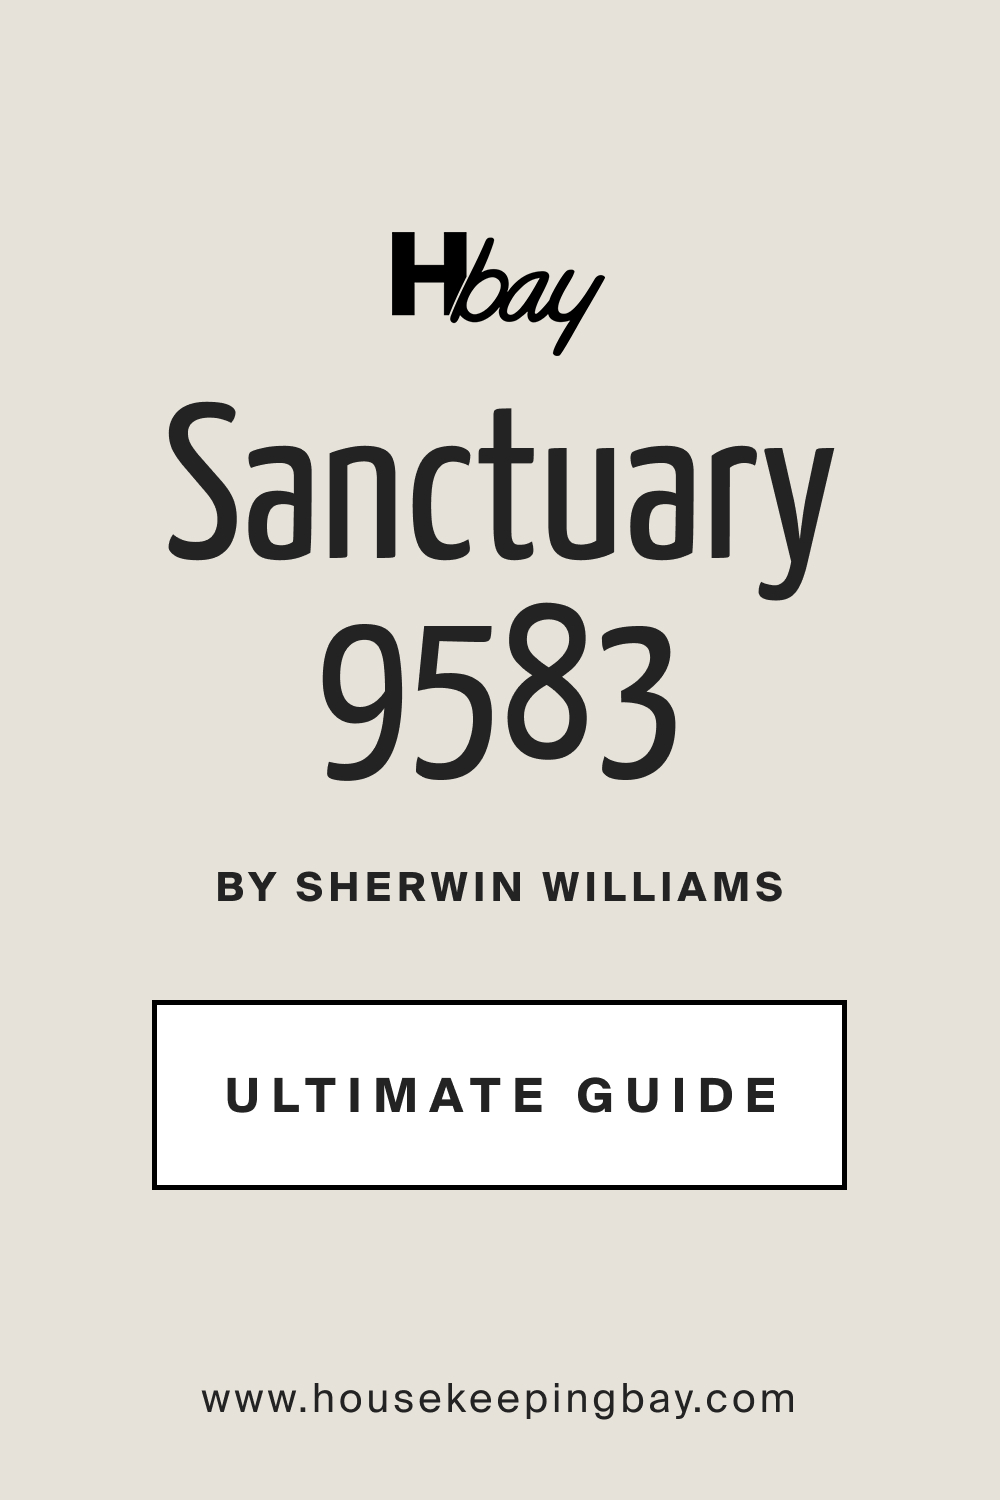 SW 9583 Sanctuary by Sherwin Williams Ultimate Guide